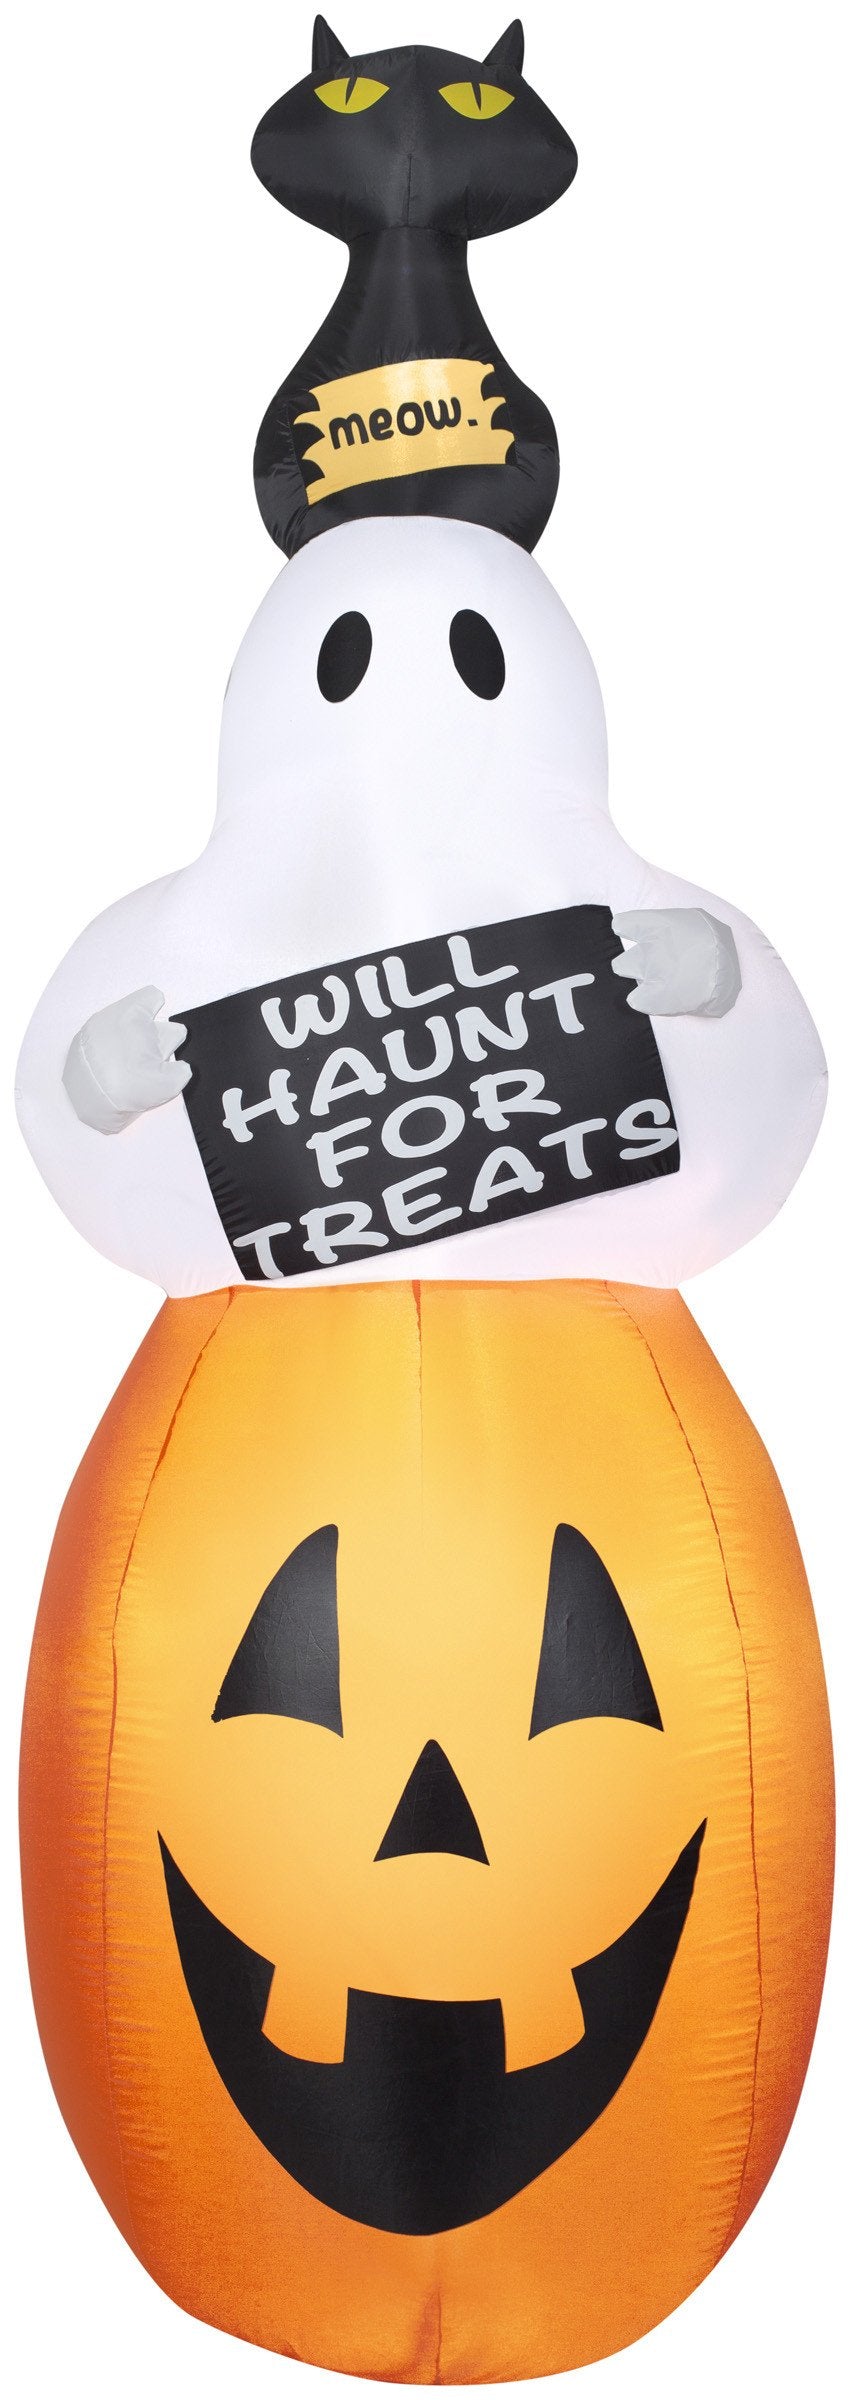 7' Airblown - Totems Will Haunt For Treats Halloween Inflatable